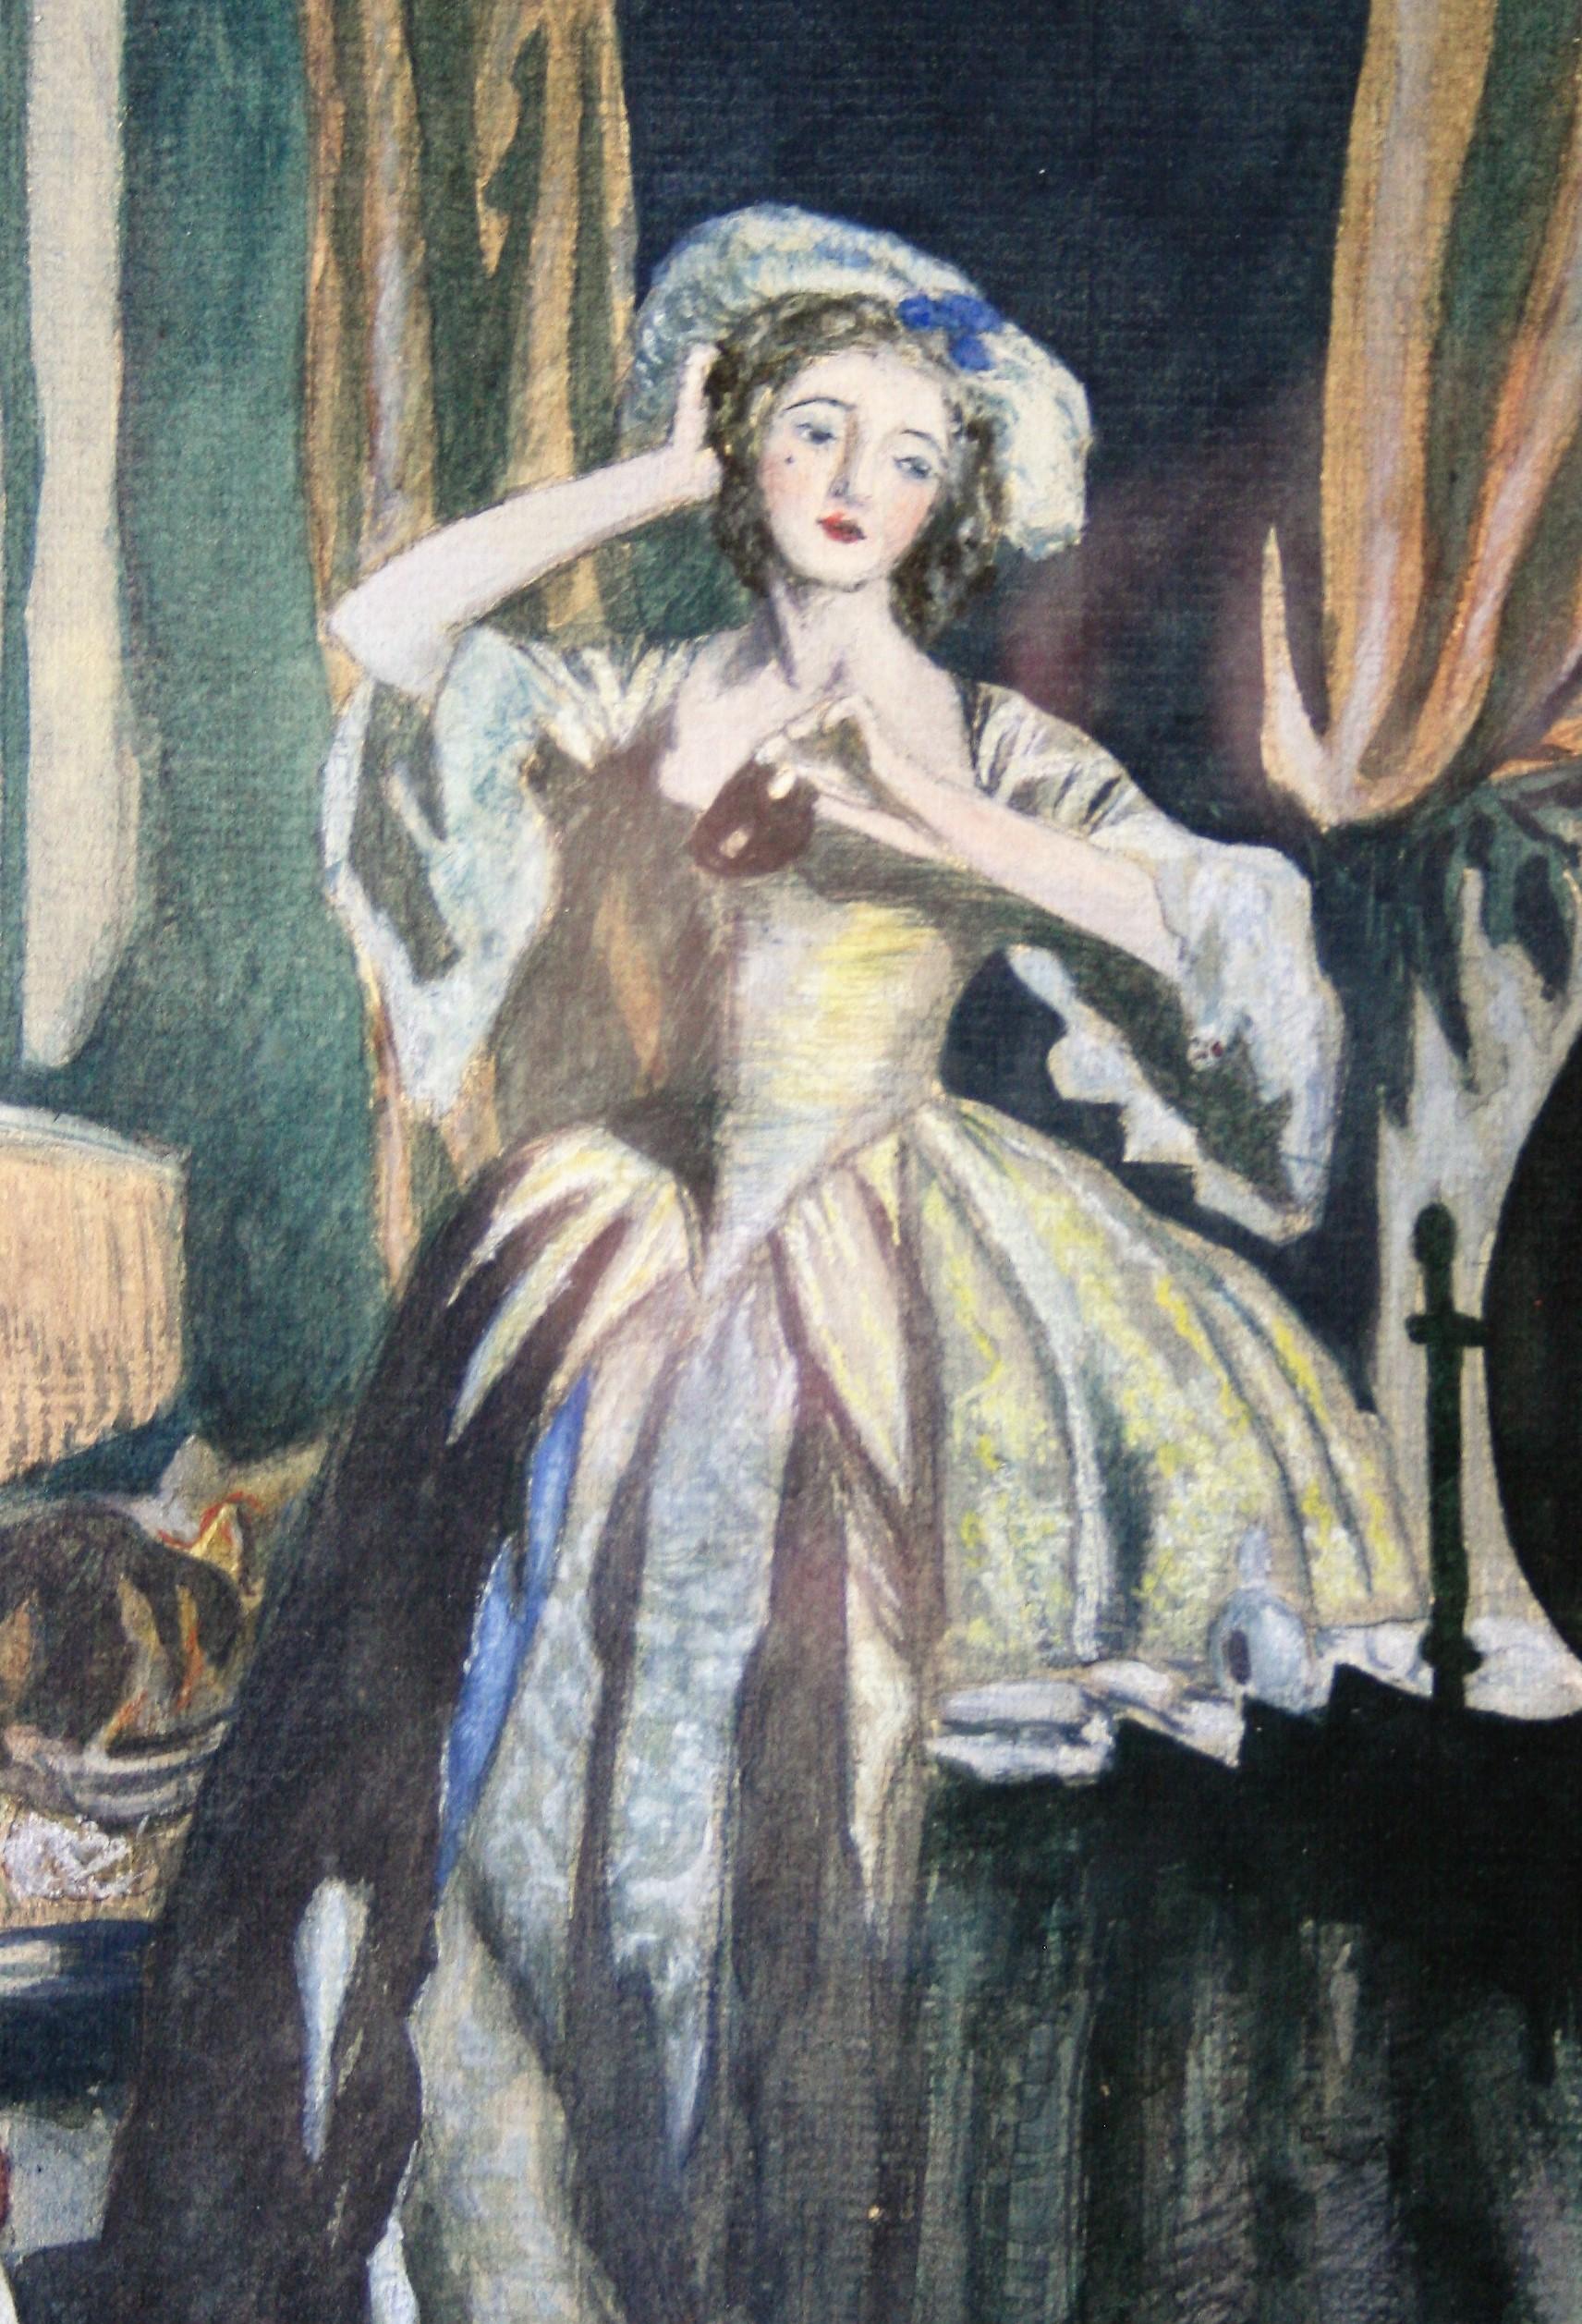 Beautiful painting representing a woman of the XVIIIth century. The scene is set in a typical interior of the period, recognisable by the furniture, armchair and bench in the Louis XV style. The interior is richly decorated with curtains and a